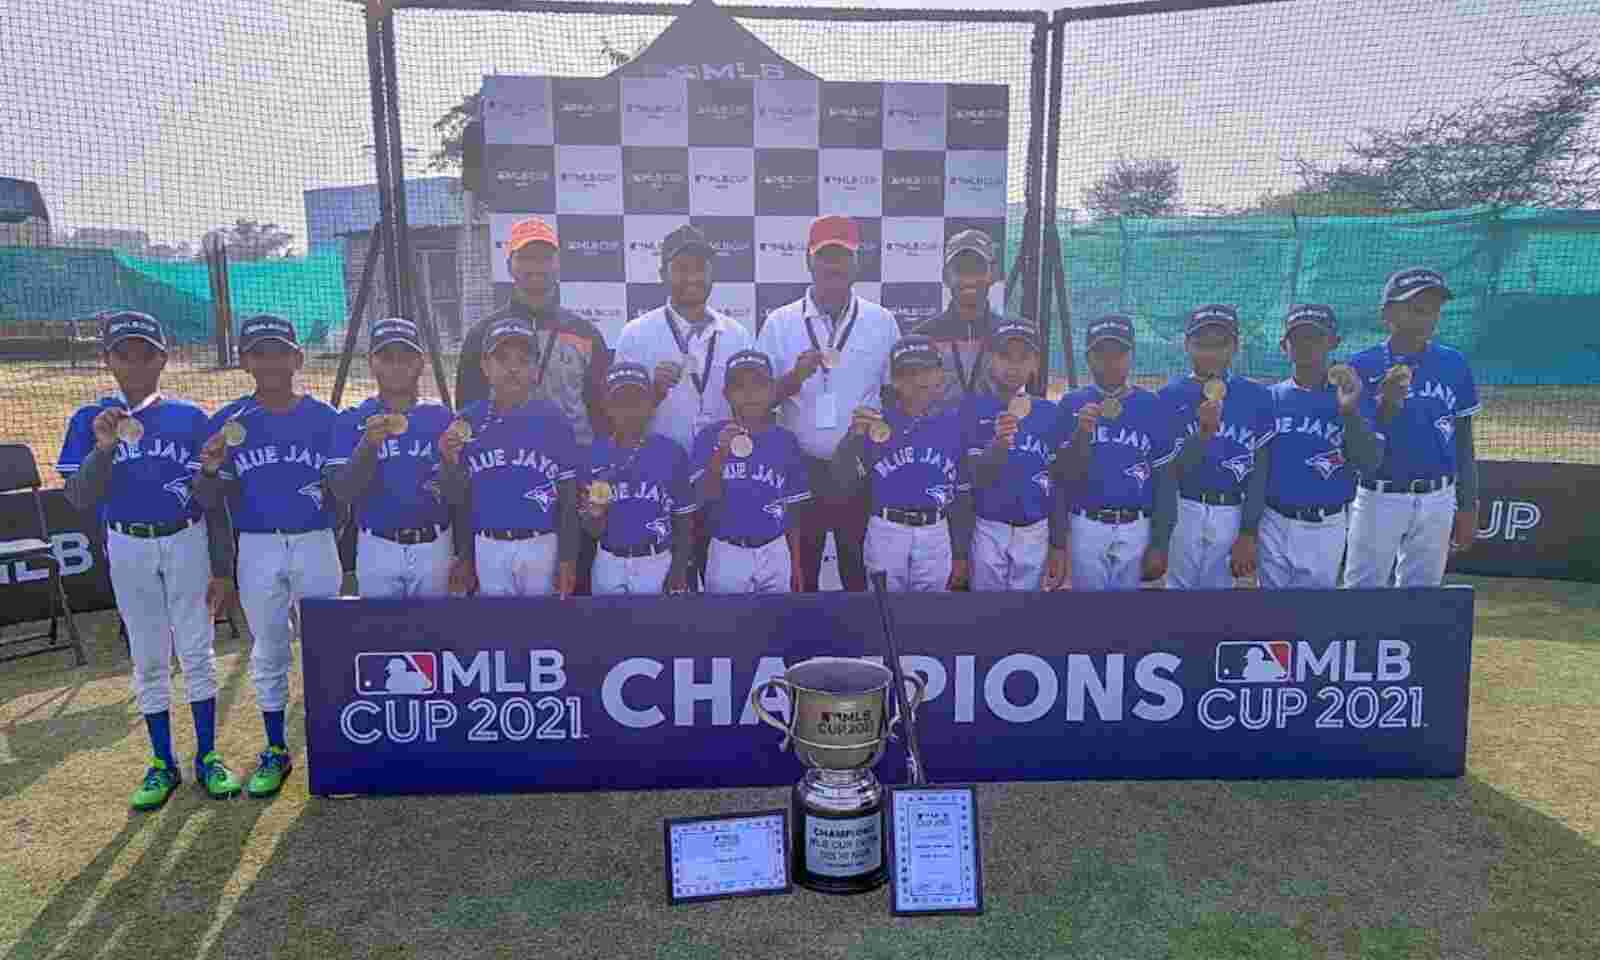 Satara Blue Jays win the first-ever MLB Cup 2021 in India